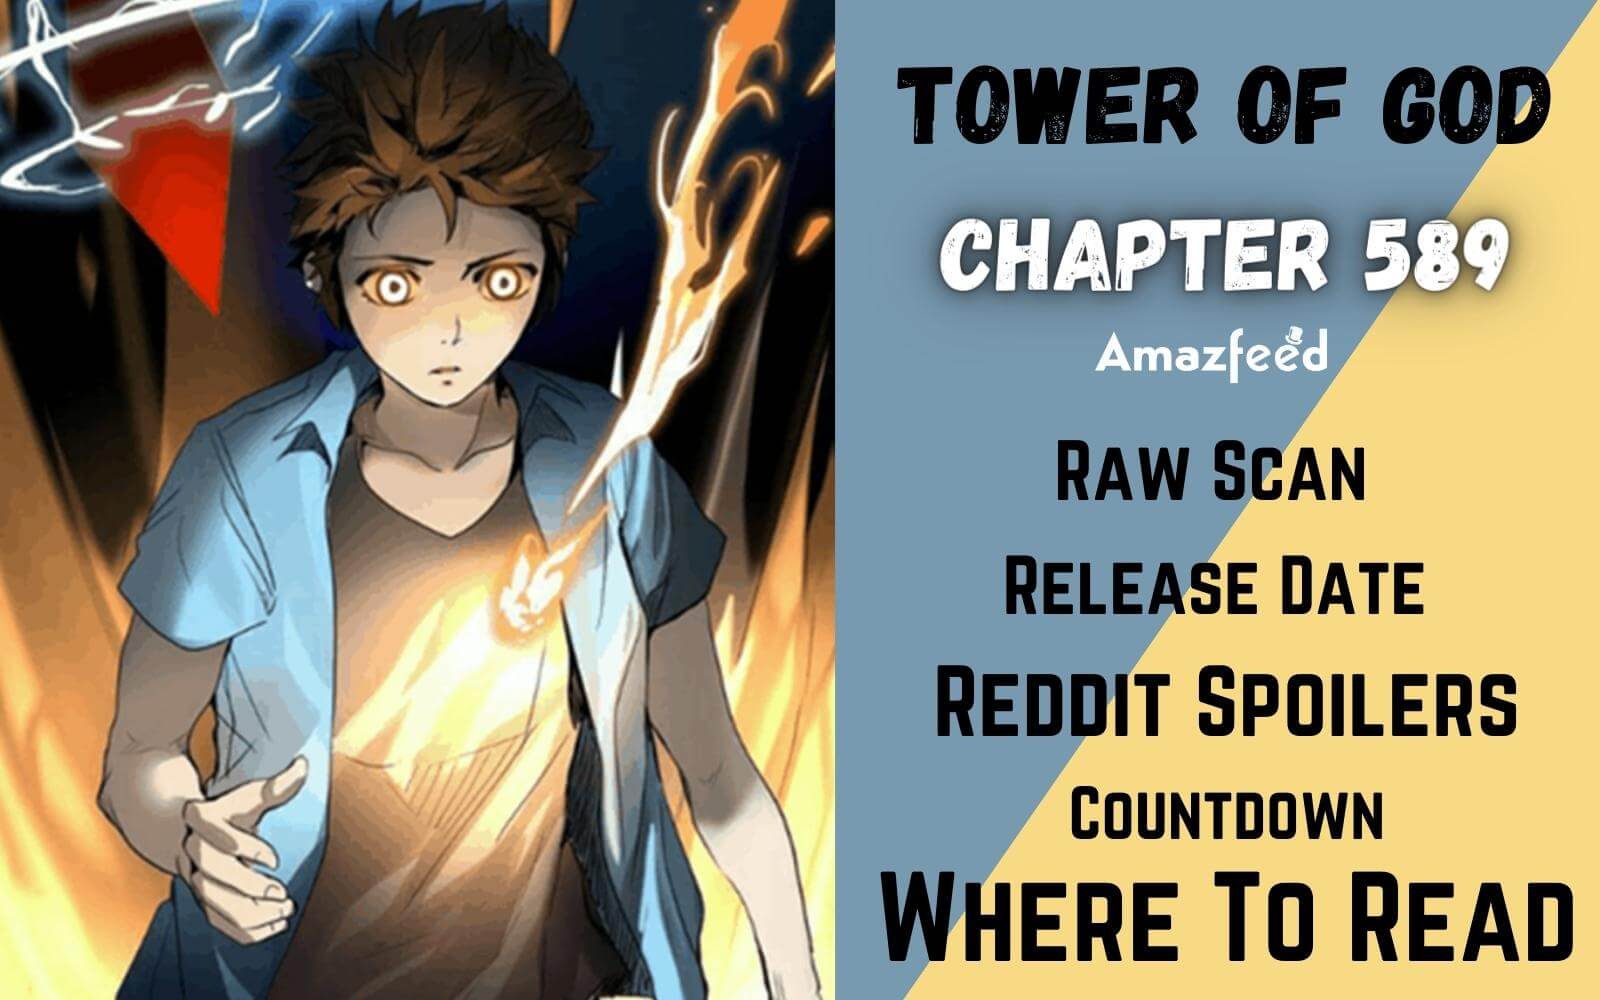 Tower Of God Chapter 589 Tower Of God Chapter 589 Spoilers, Raw Scan, Release Date, Countdown &  Where to Read » Amazfeed